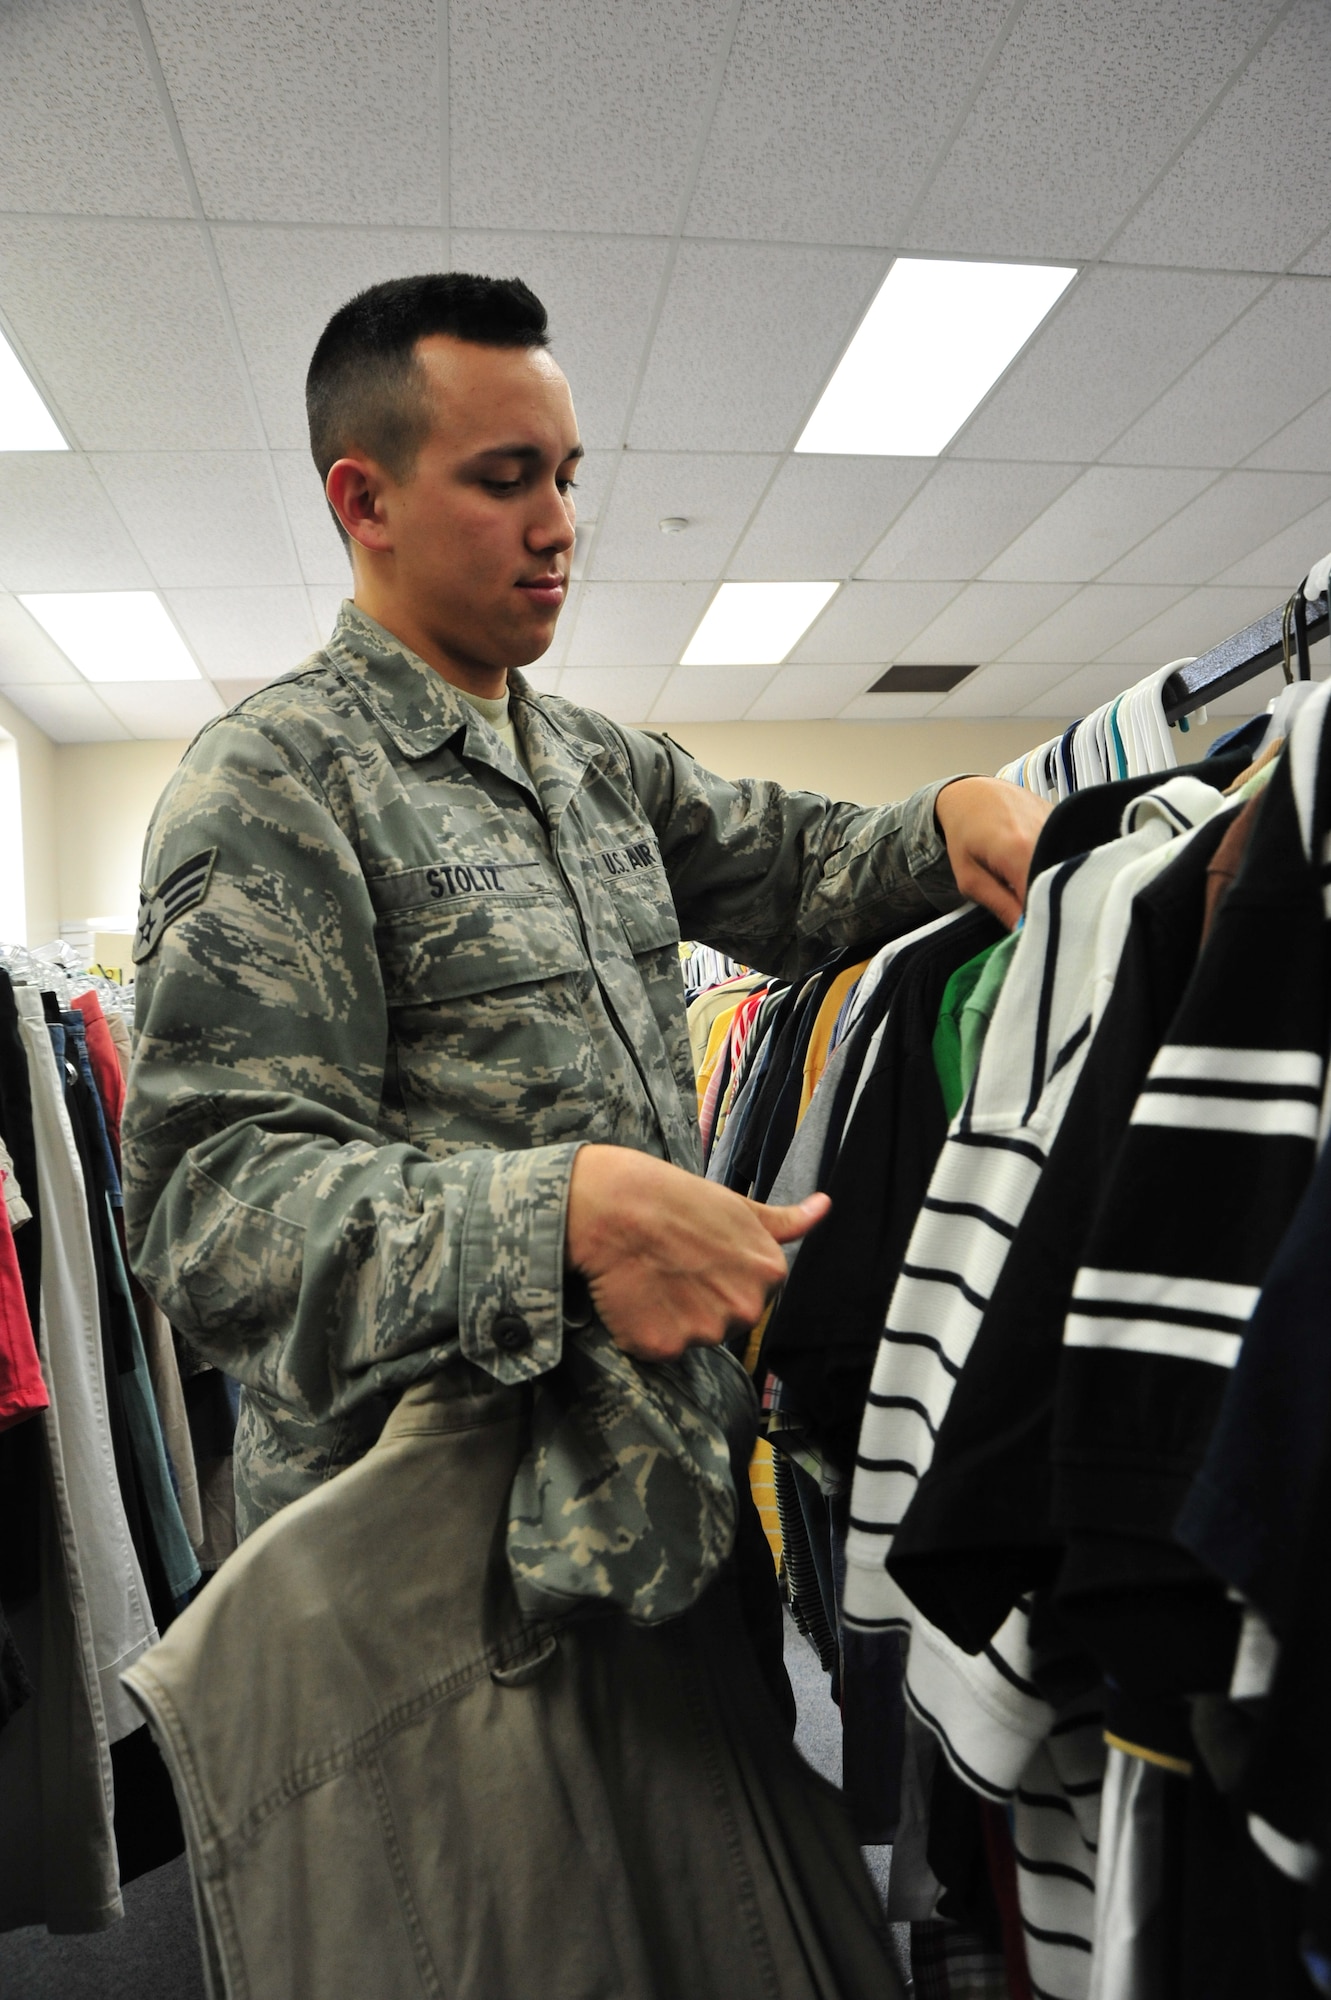 Senior Airman Christopher Stoltz looks through some of the donated items at Maxwell Air Force Base's Airman's Attic, March 20. Maxwell’s Airman’s Attic provides a variety of items to enlisted Airmen E-6 and below. (U.S. Air Force photo by Airman 1st Class William Blankenship) 
